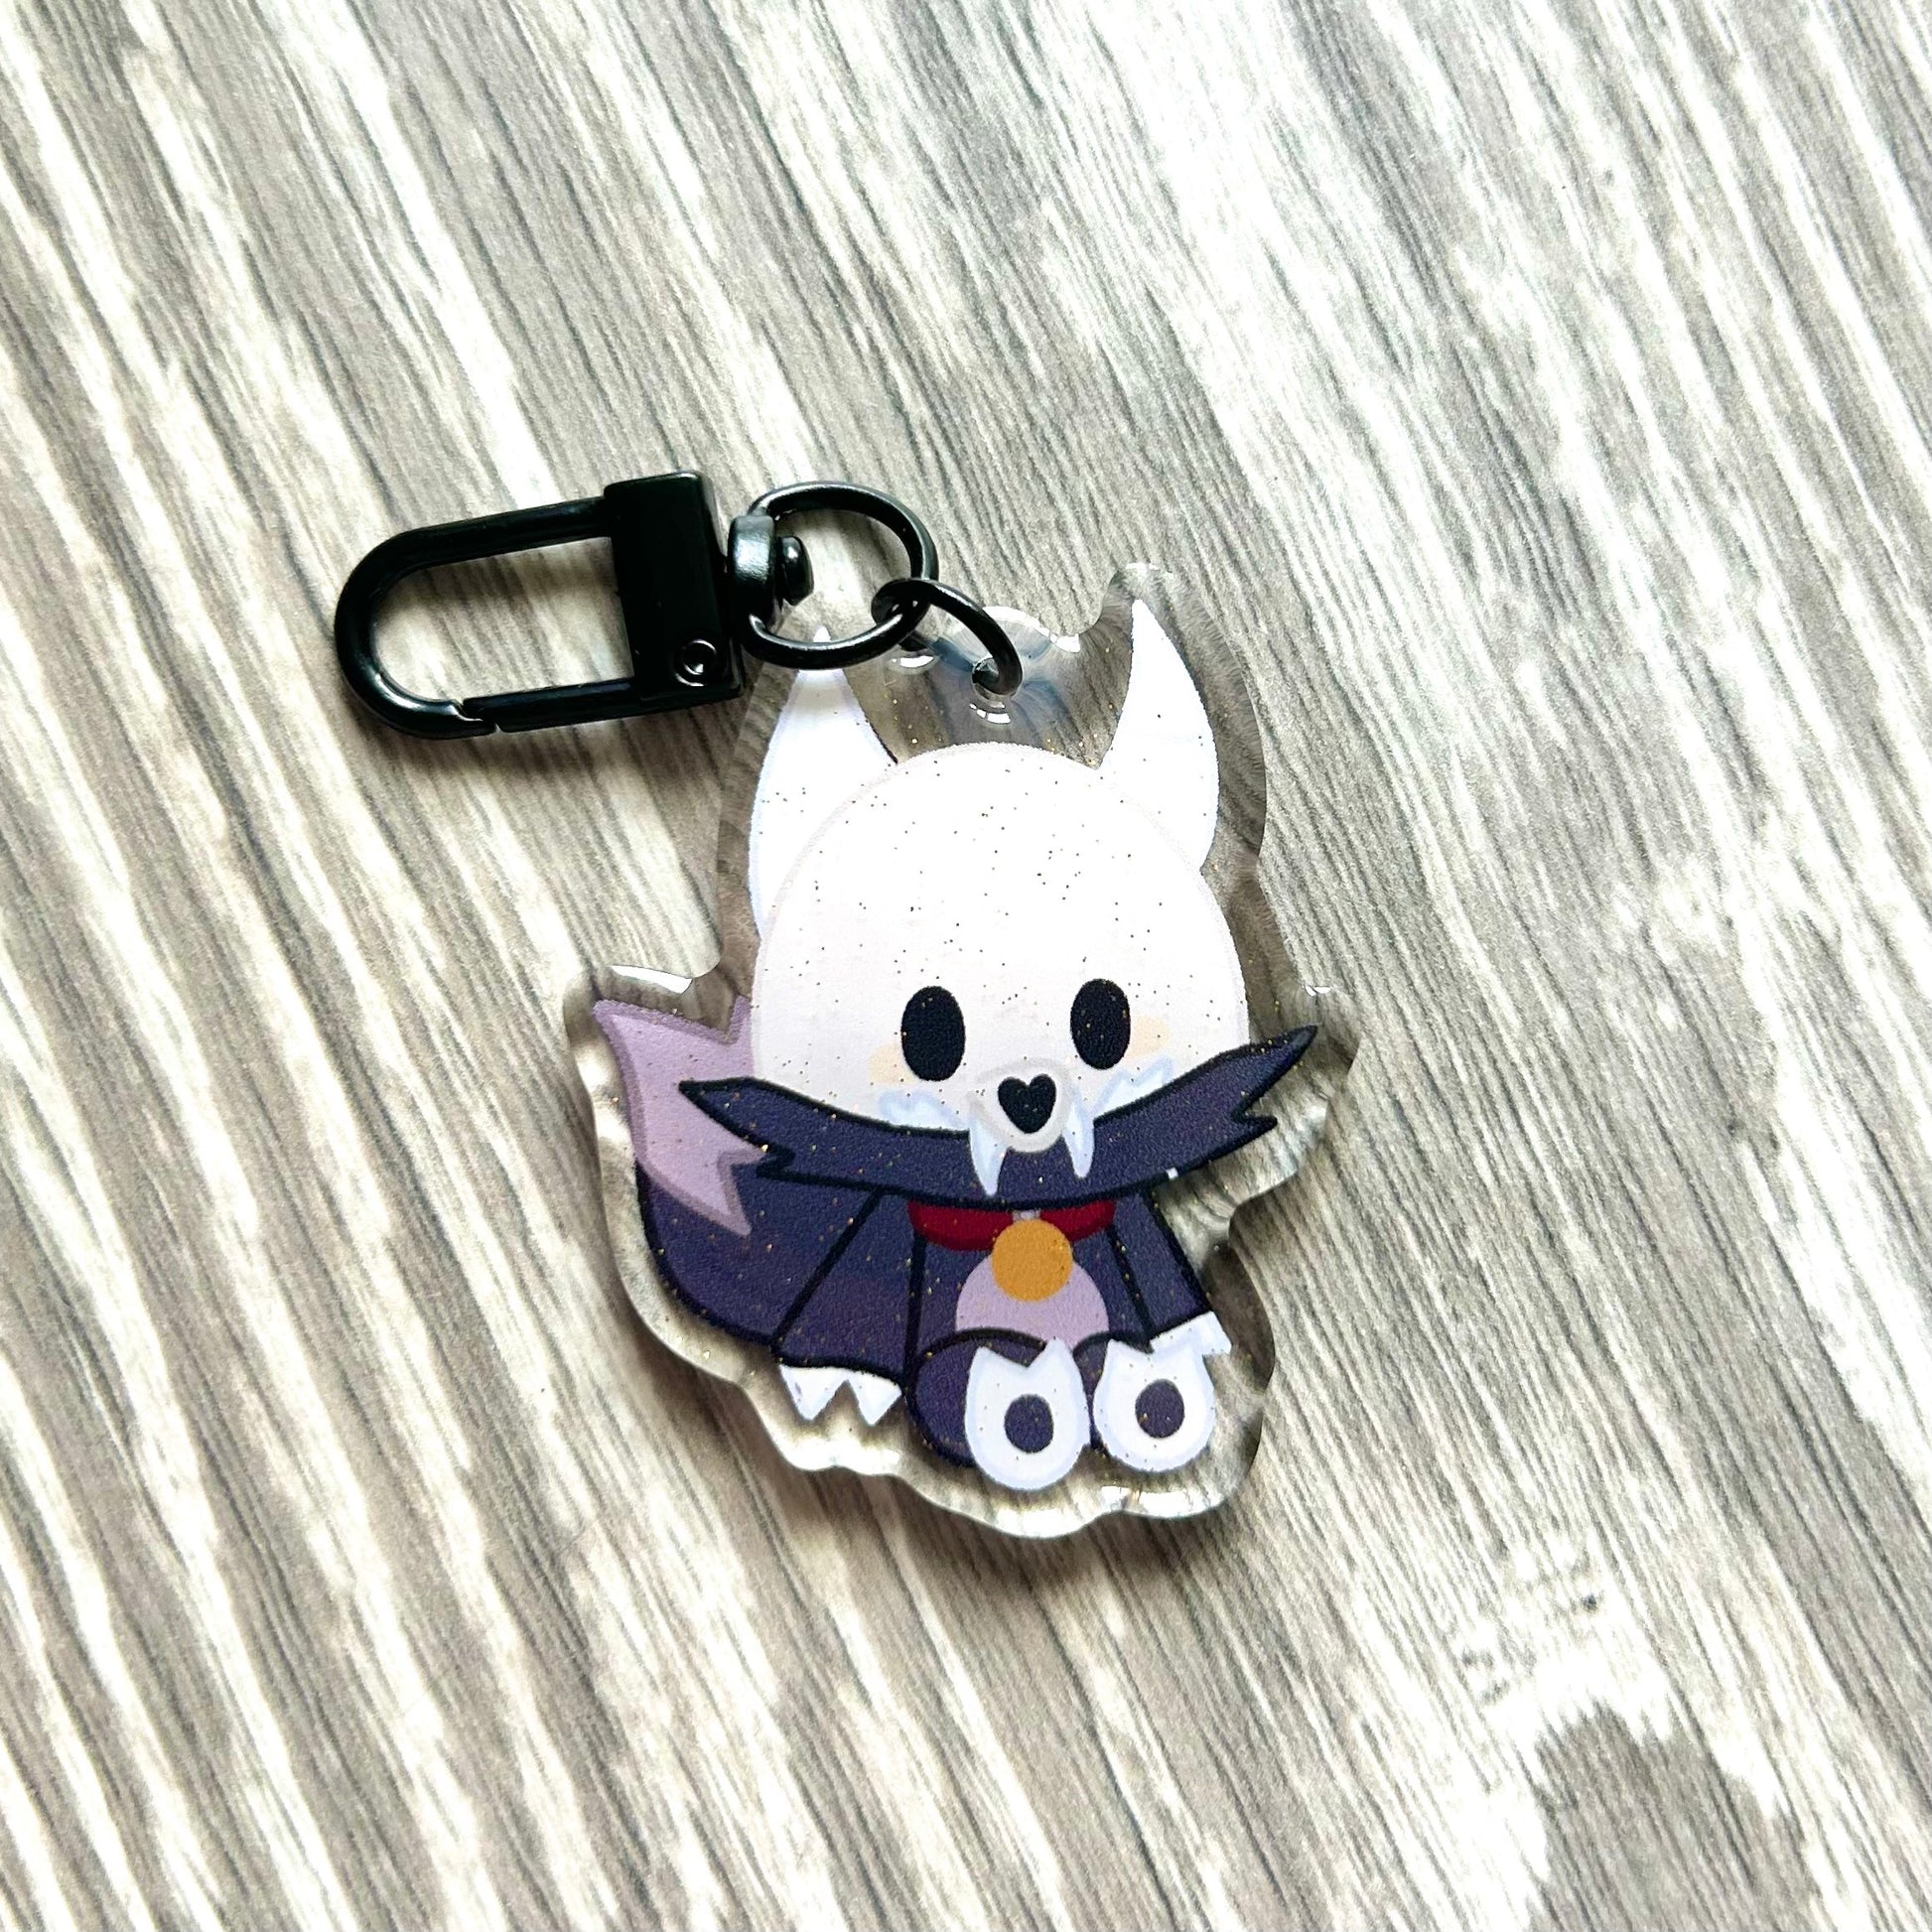 Buy The Owl House Acrylic Charms 6.5cm/2.5inches Online in India 